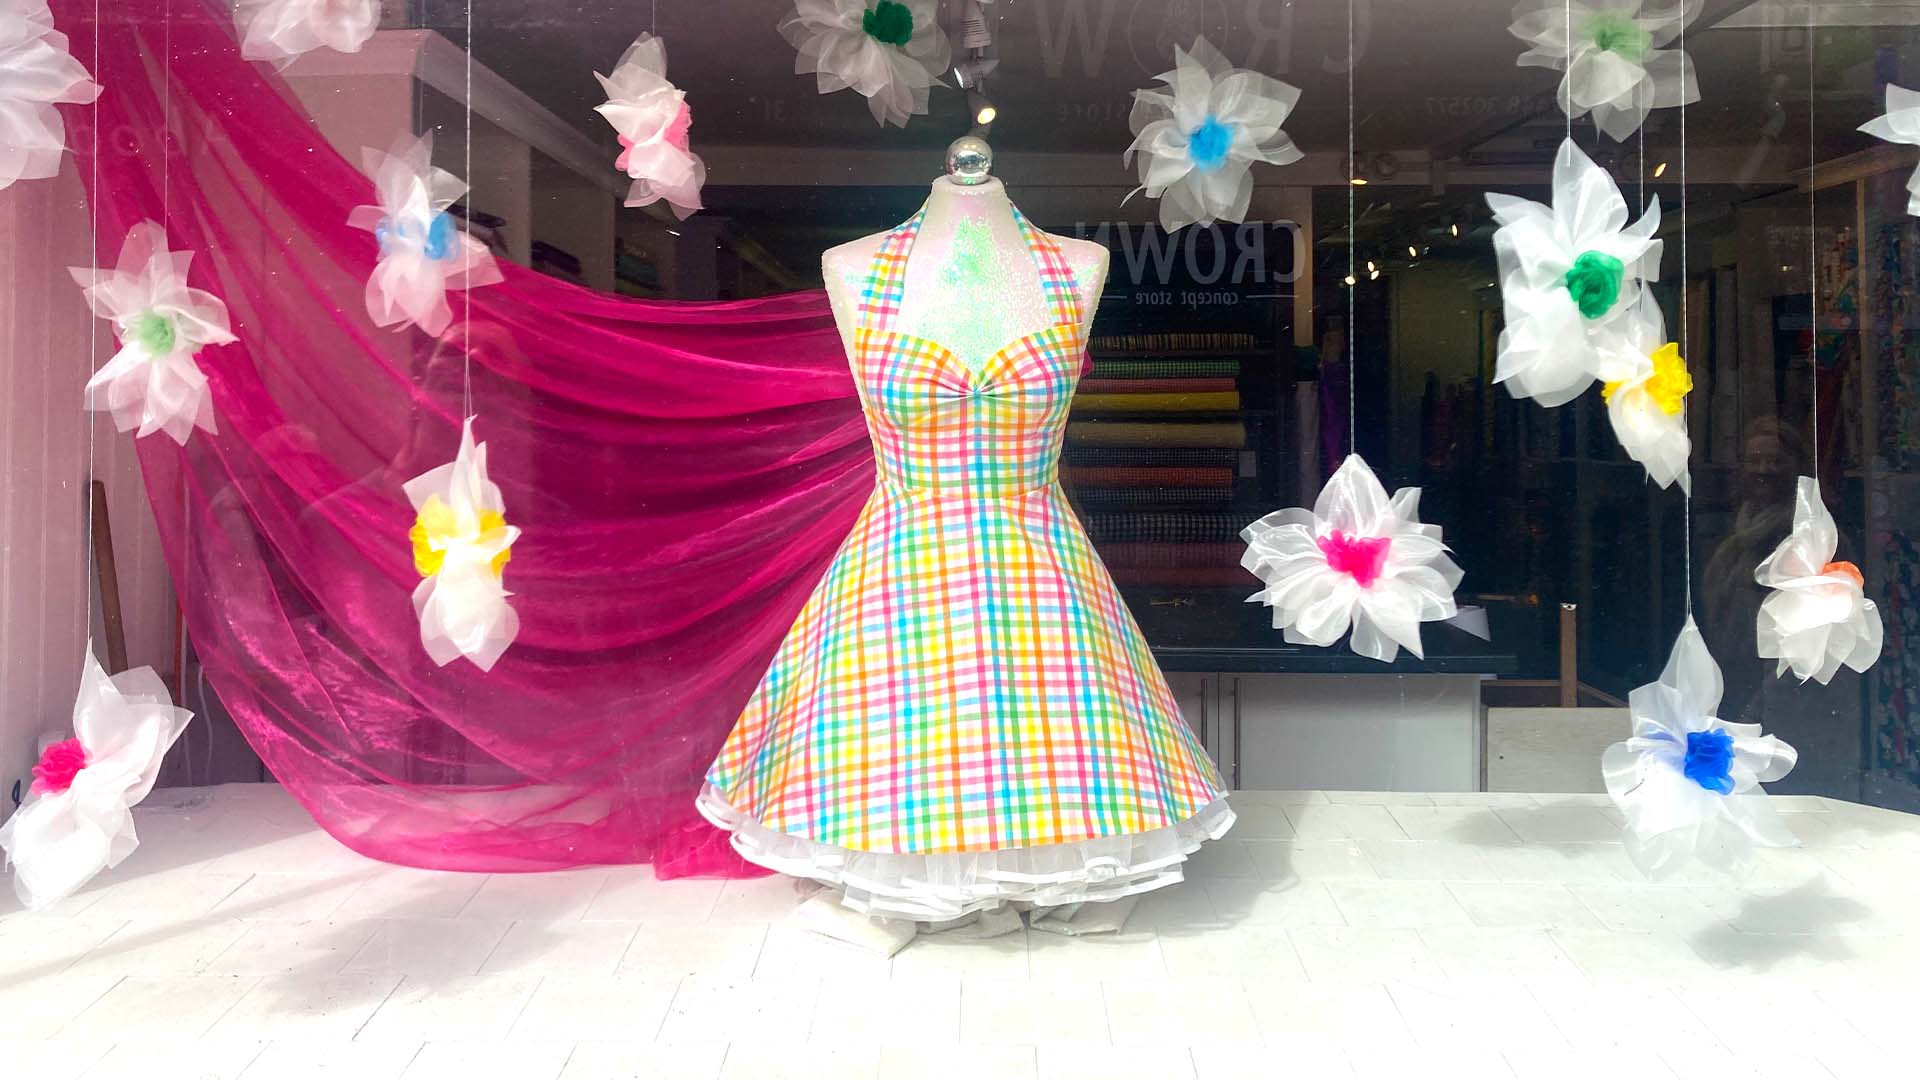 brighton fabric shop Cloth Control window display situated on the famous North Laines